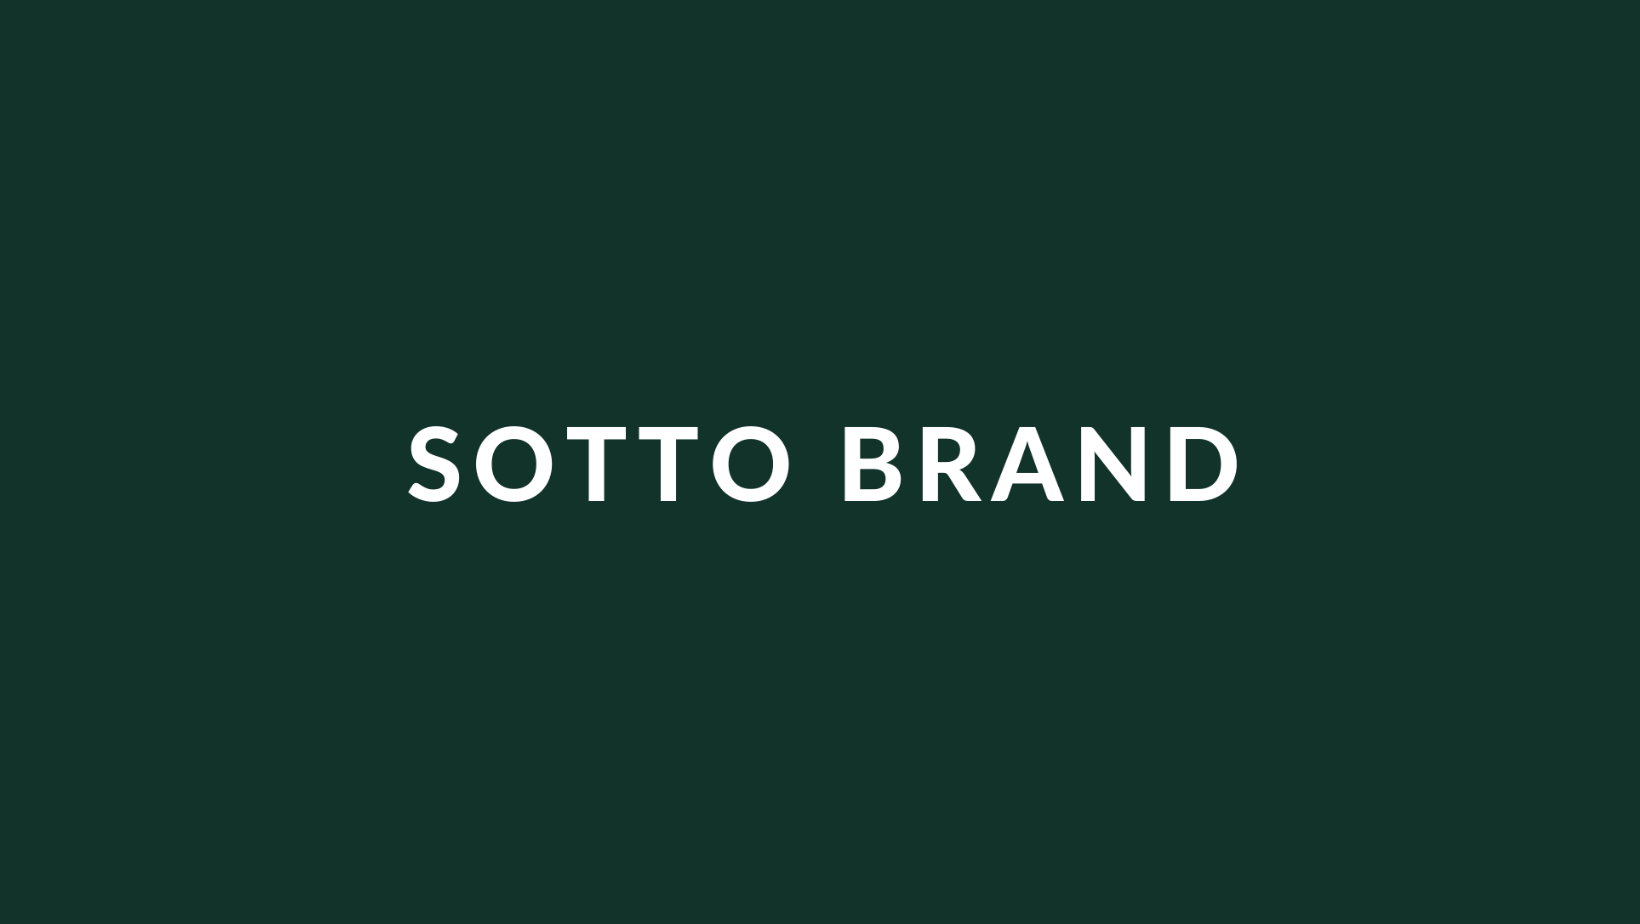 ABOUT SOTTO BRAND